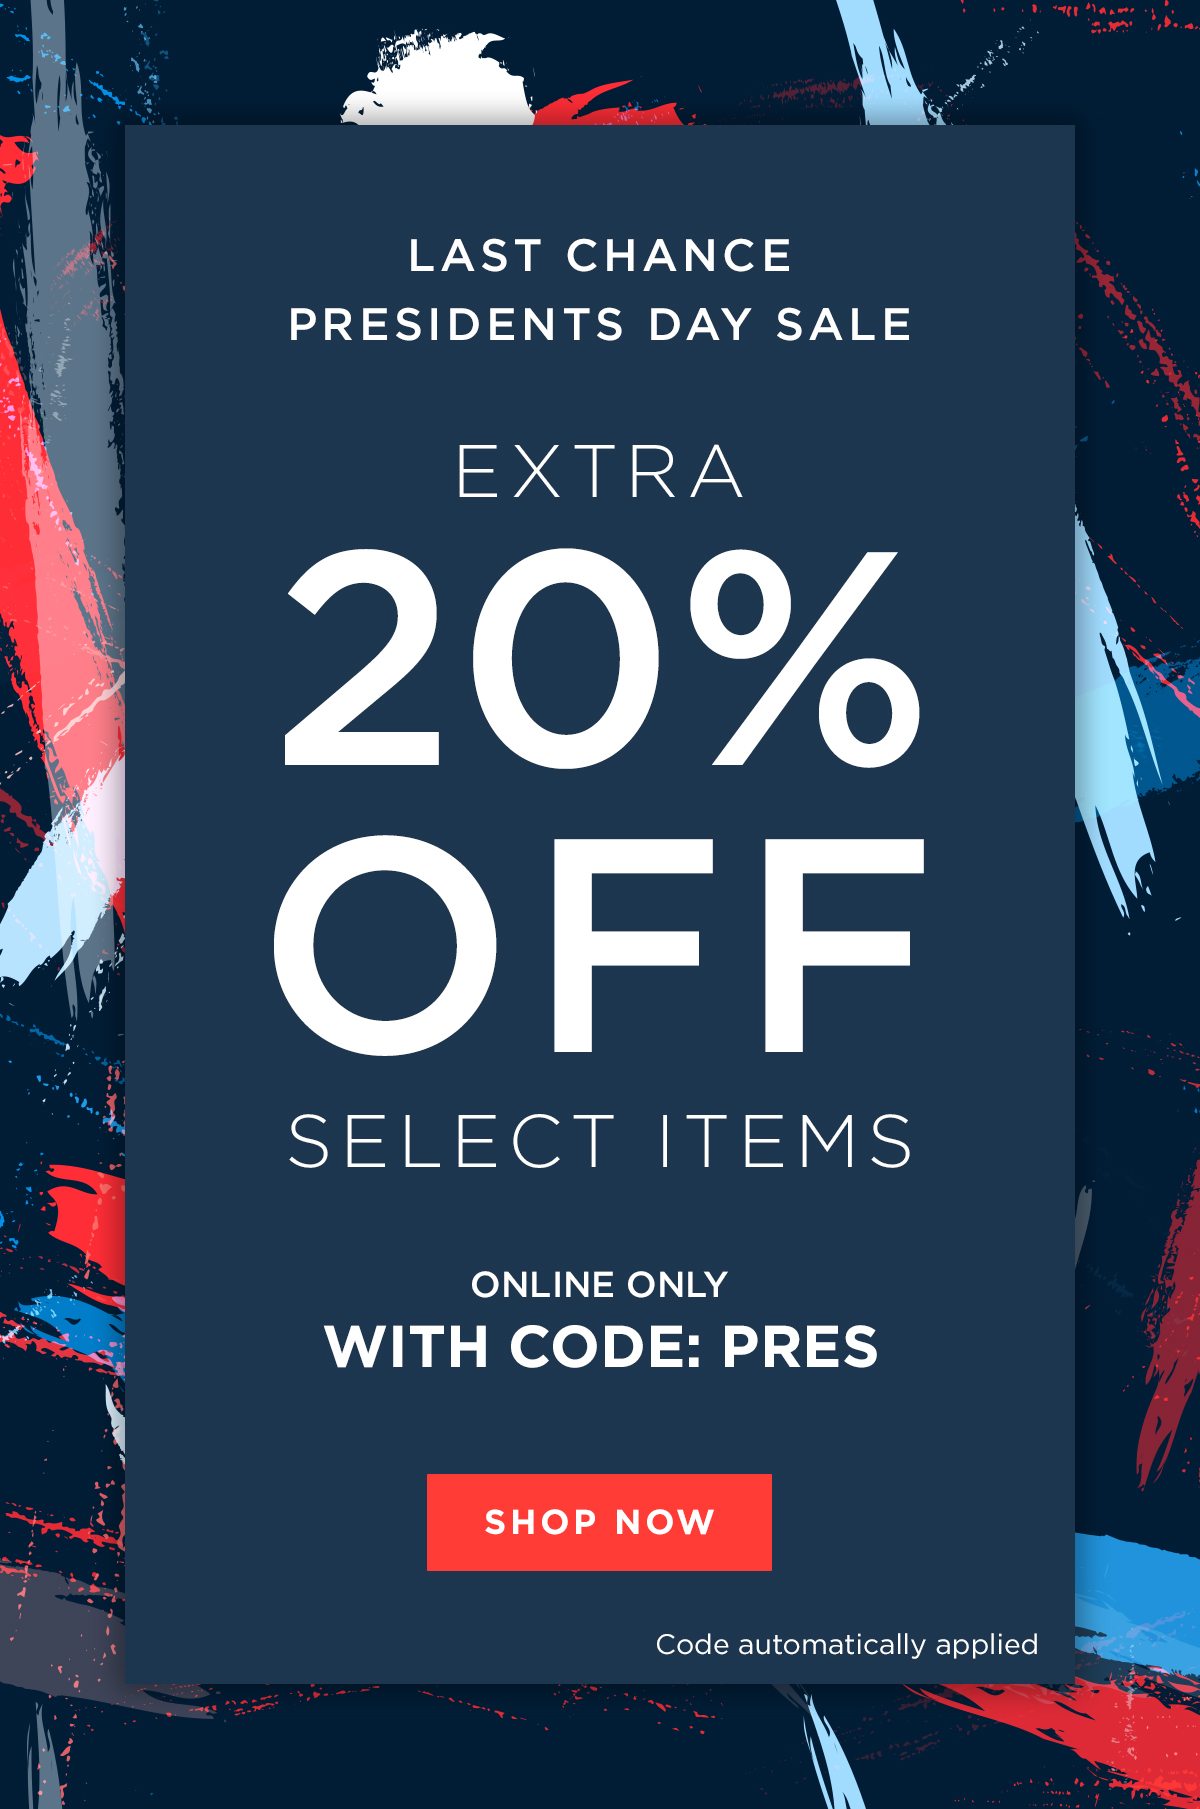 Presidents Day Sale - Save An Extra 20% Off Select Items With Code: PRES - Shop Now